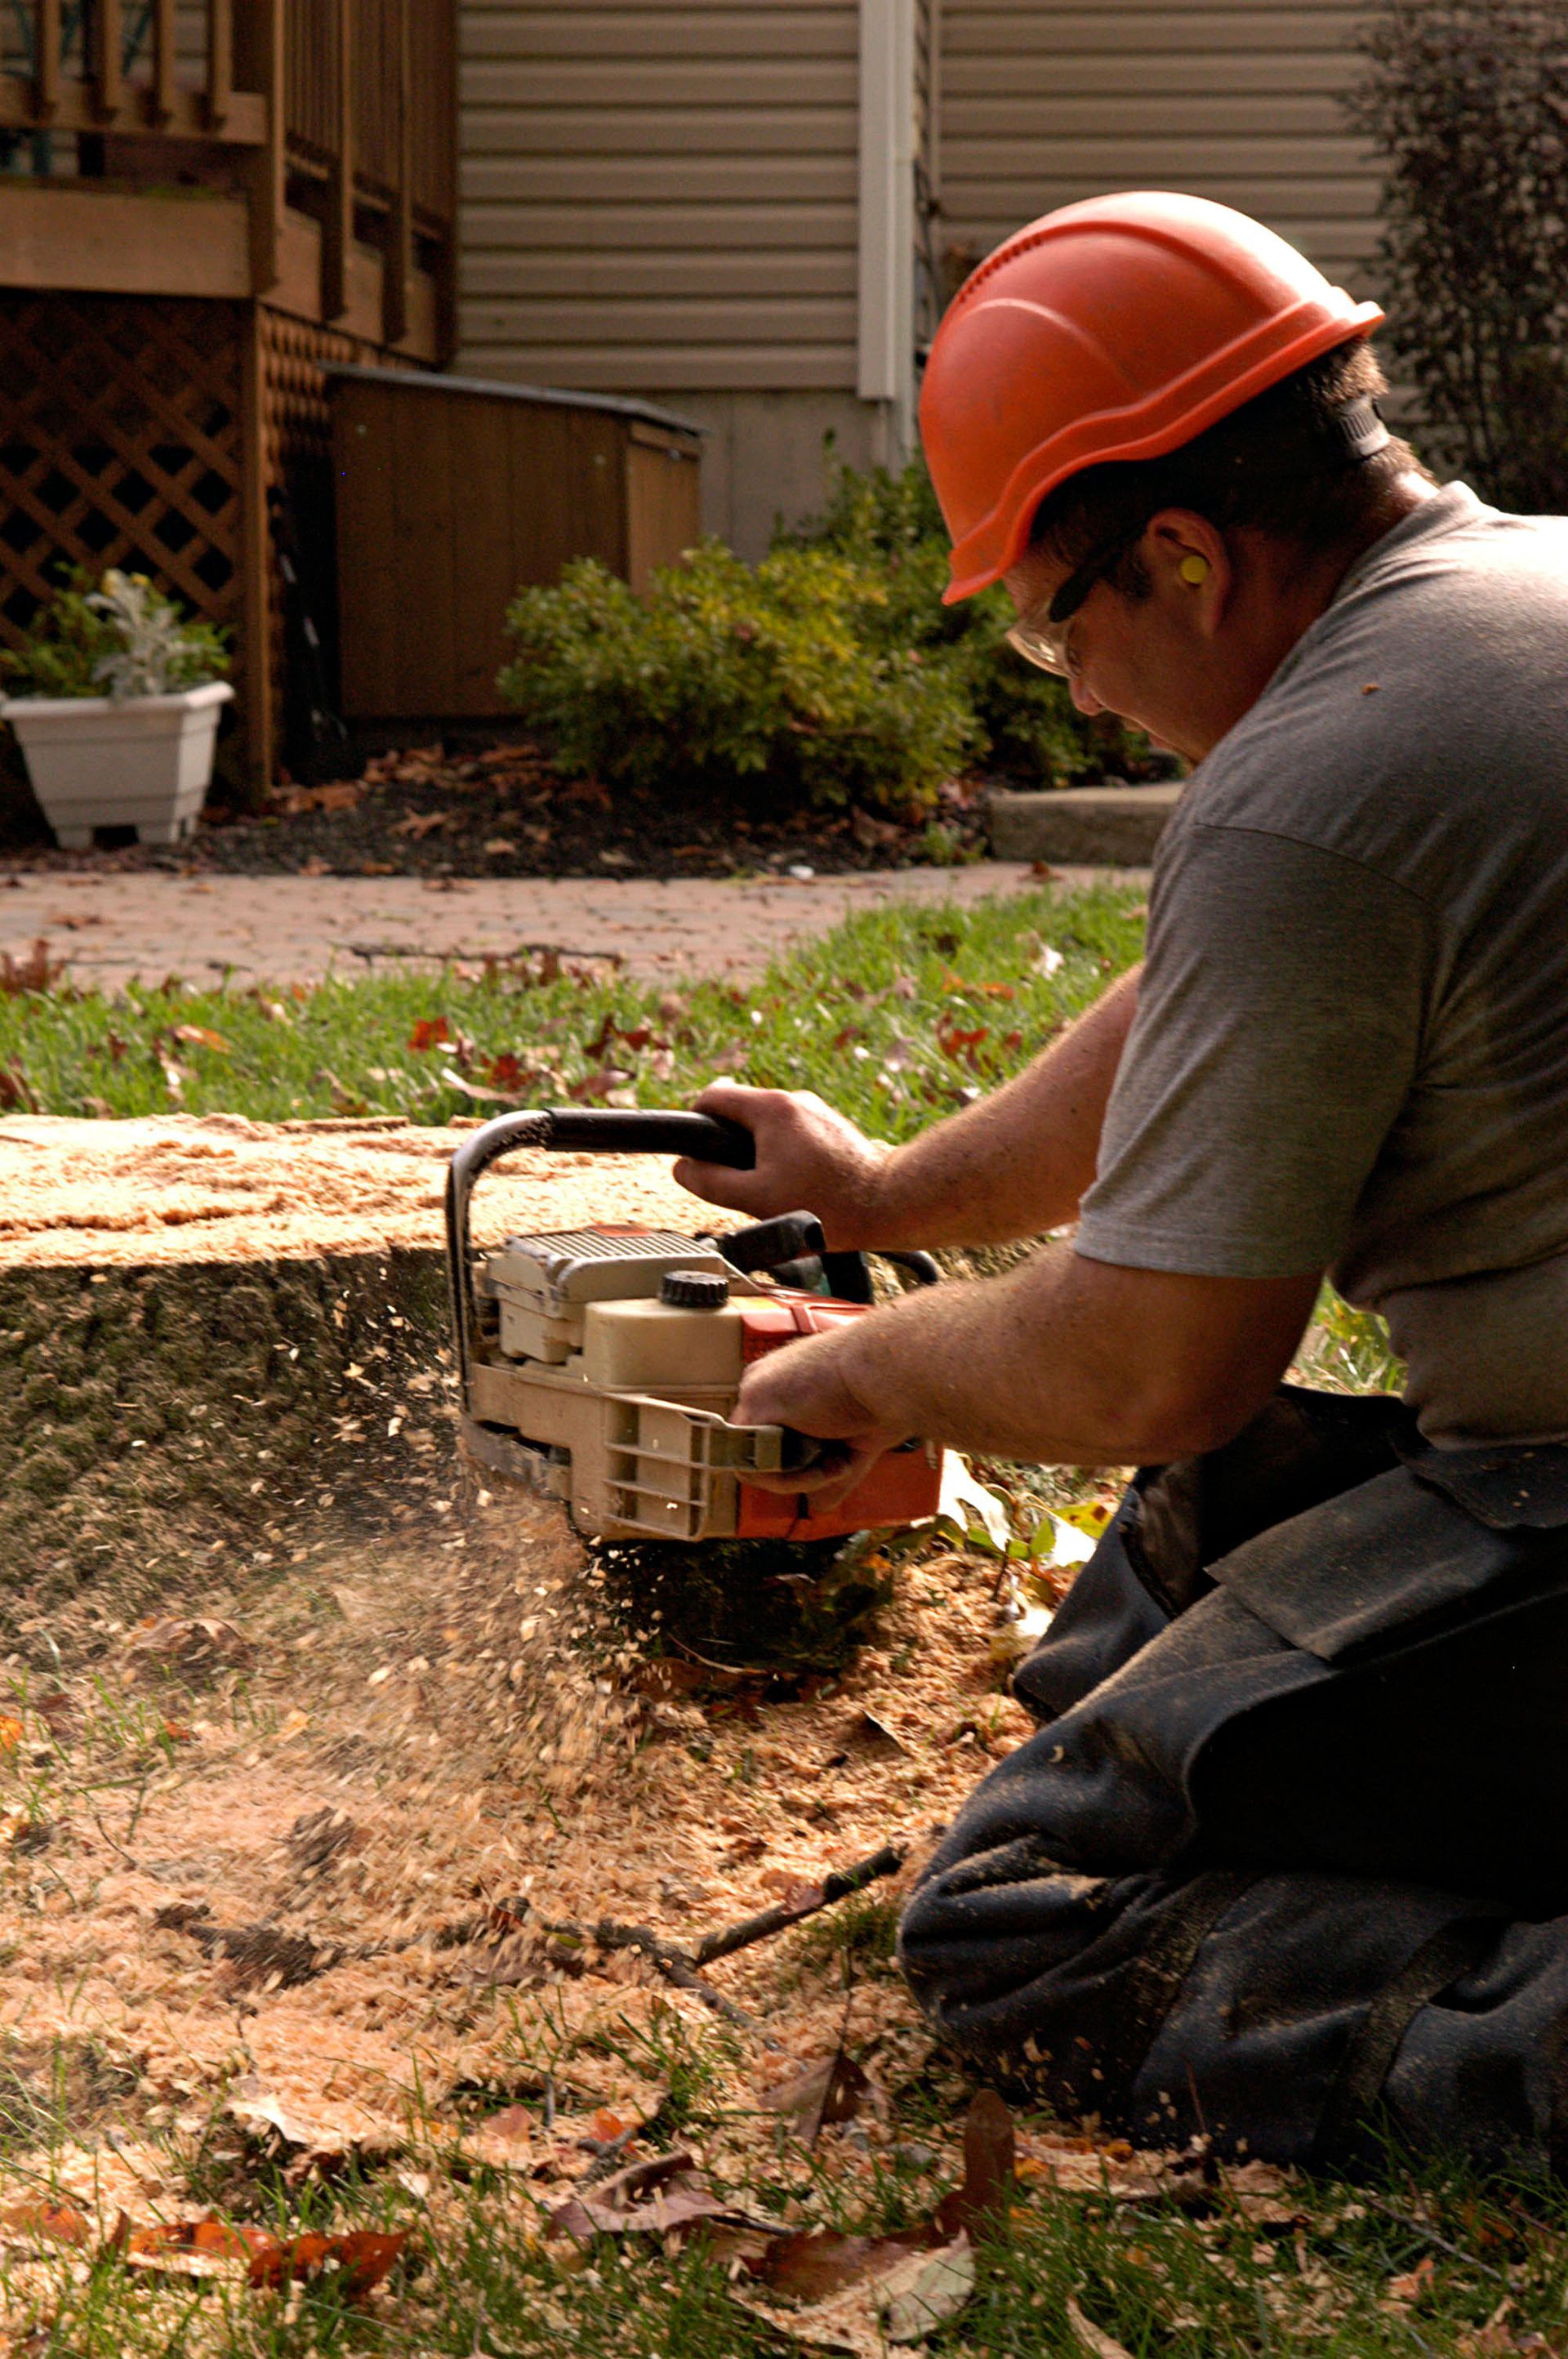 A man wearing a hard hat is cutting a tree stump with a chainsaw.